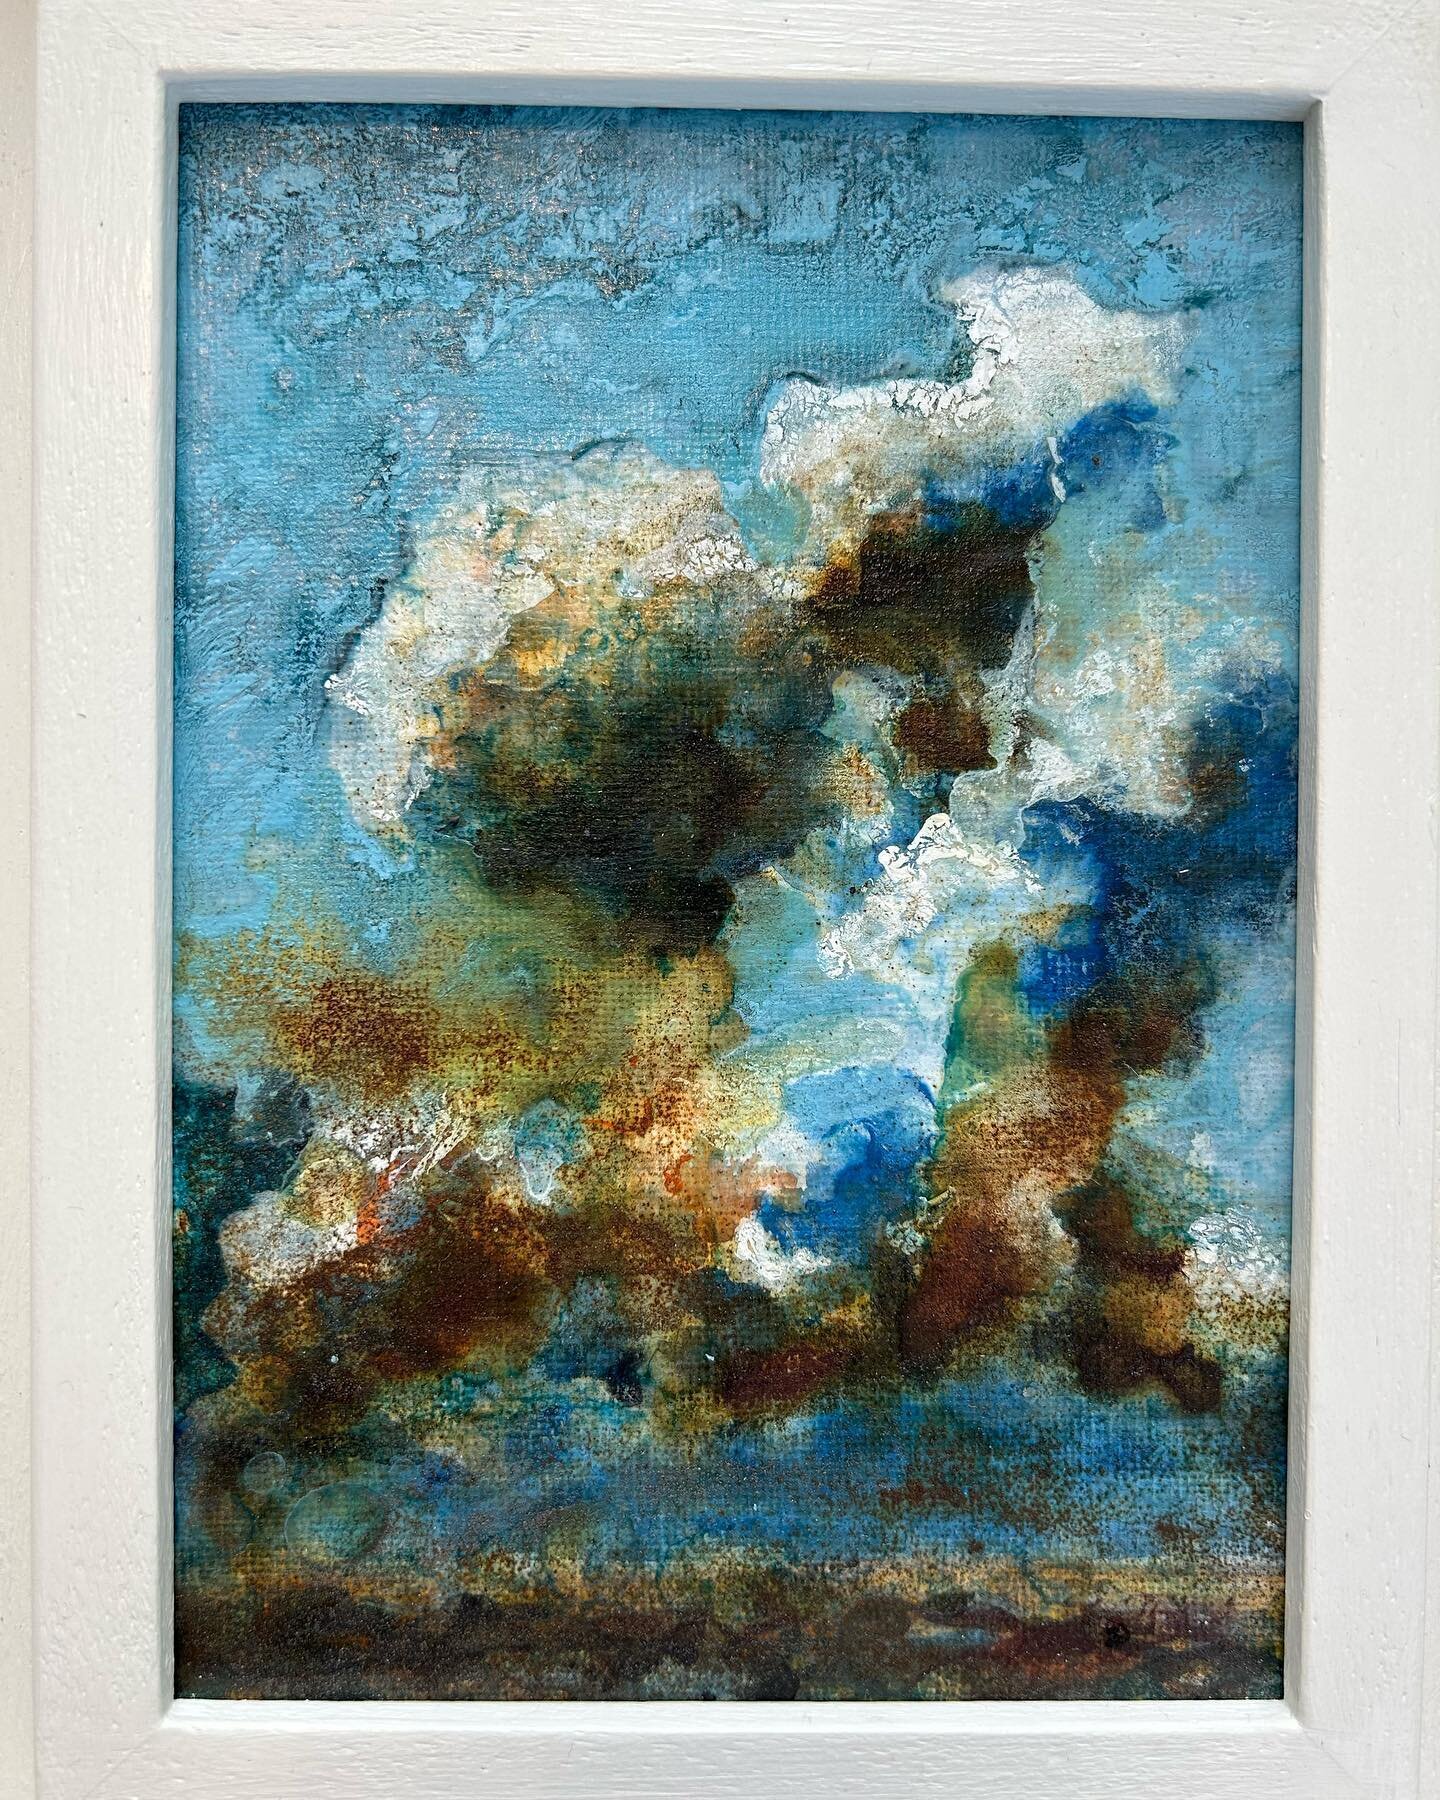 This little gem is off to its new home. Still lots to see at no. 30 Marlborough Open Studios this weekend 11-5pm @marlboroughopenstudios #artforsale #contemporaryart #contemporarybritishpainting #affordableart #whattodothisweekend